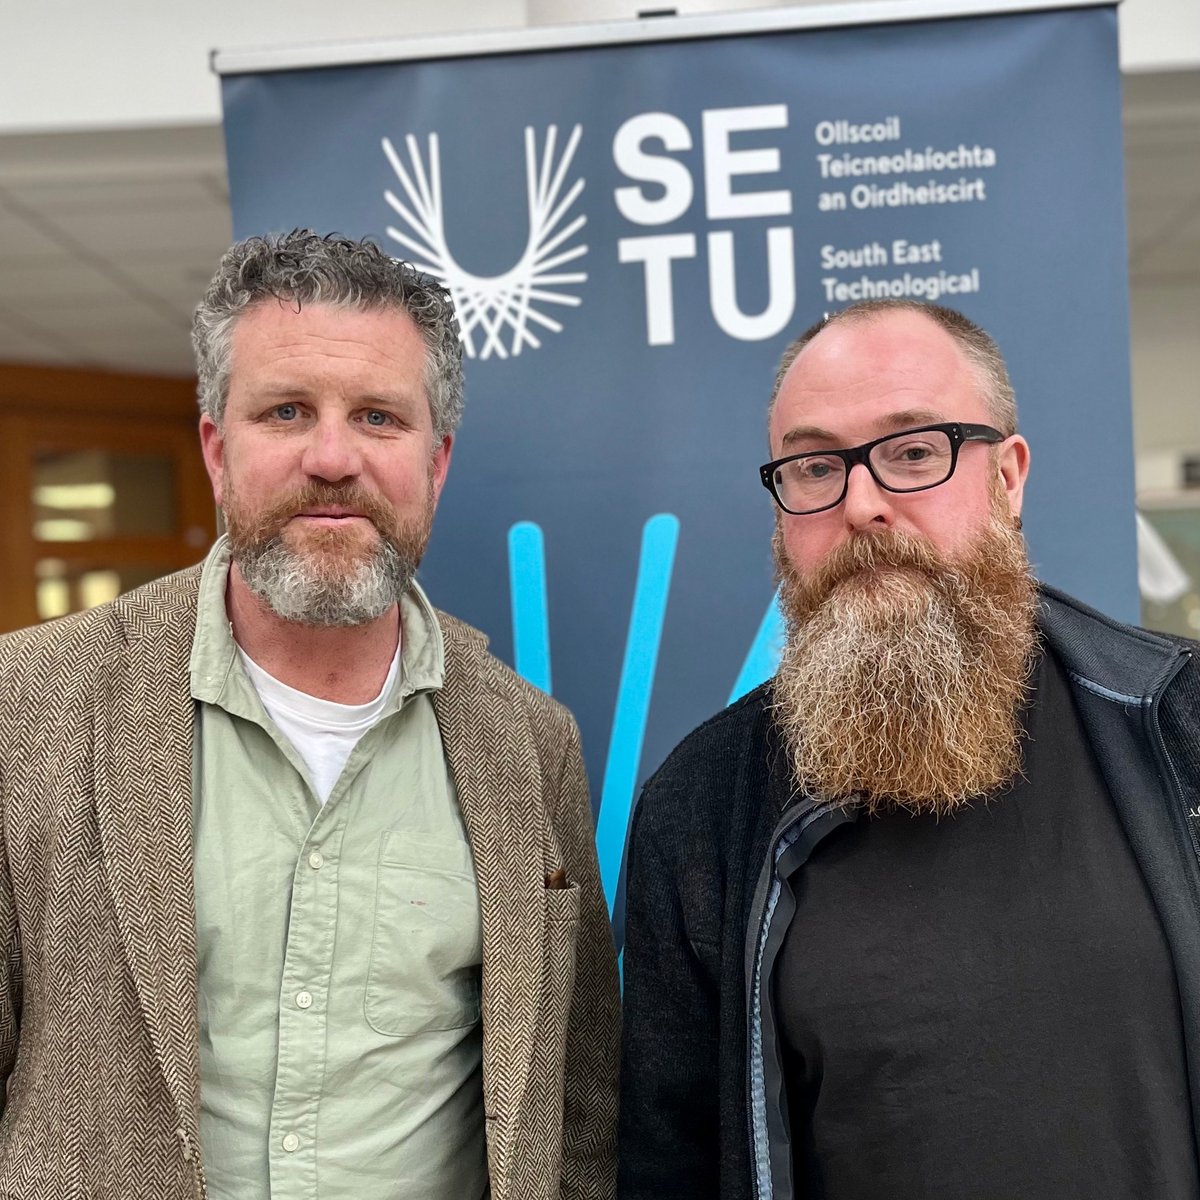 Our latest episode about Music Industry Ethics is coming this lunchtime! @SETUIreland lecturer @IreMusPod chats with @roboconnor_irl about his research into the ethical practices of the music business. Available wherever you listen to podcasts podfollow.com/9plus